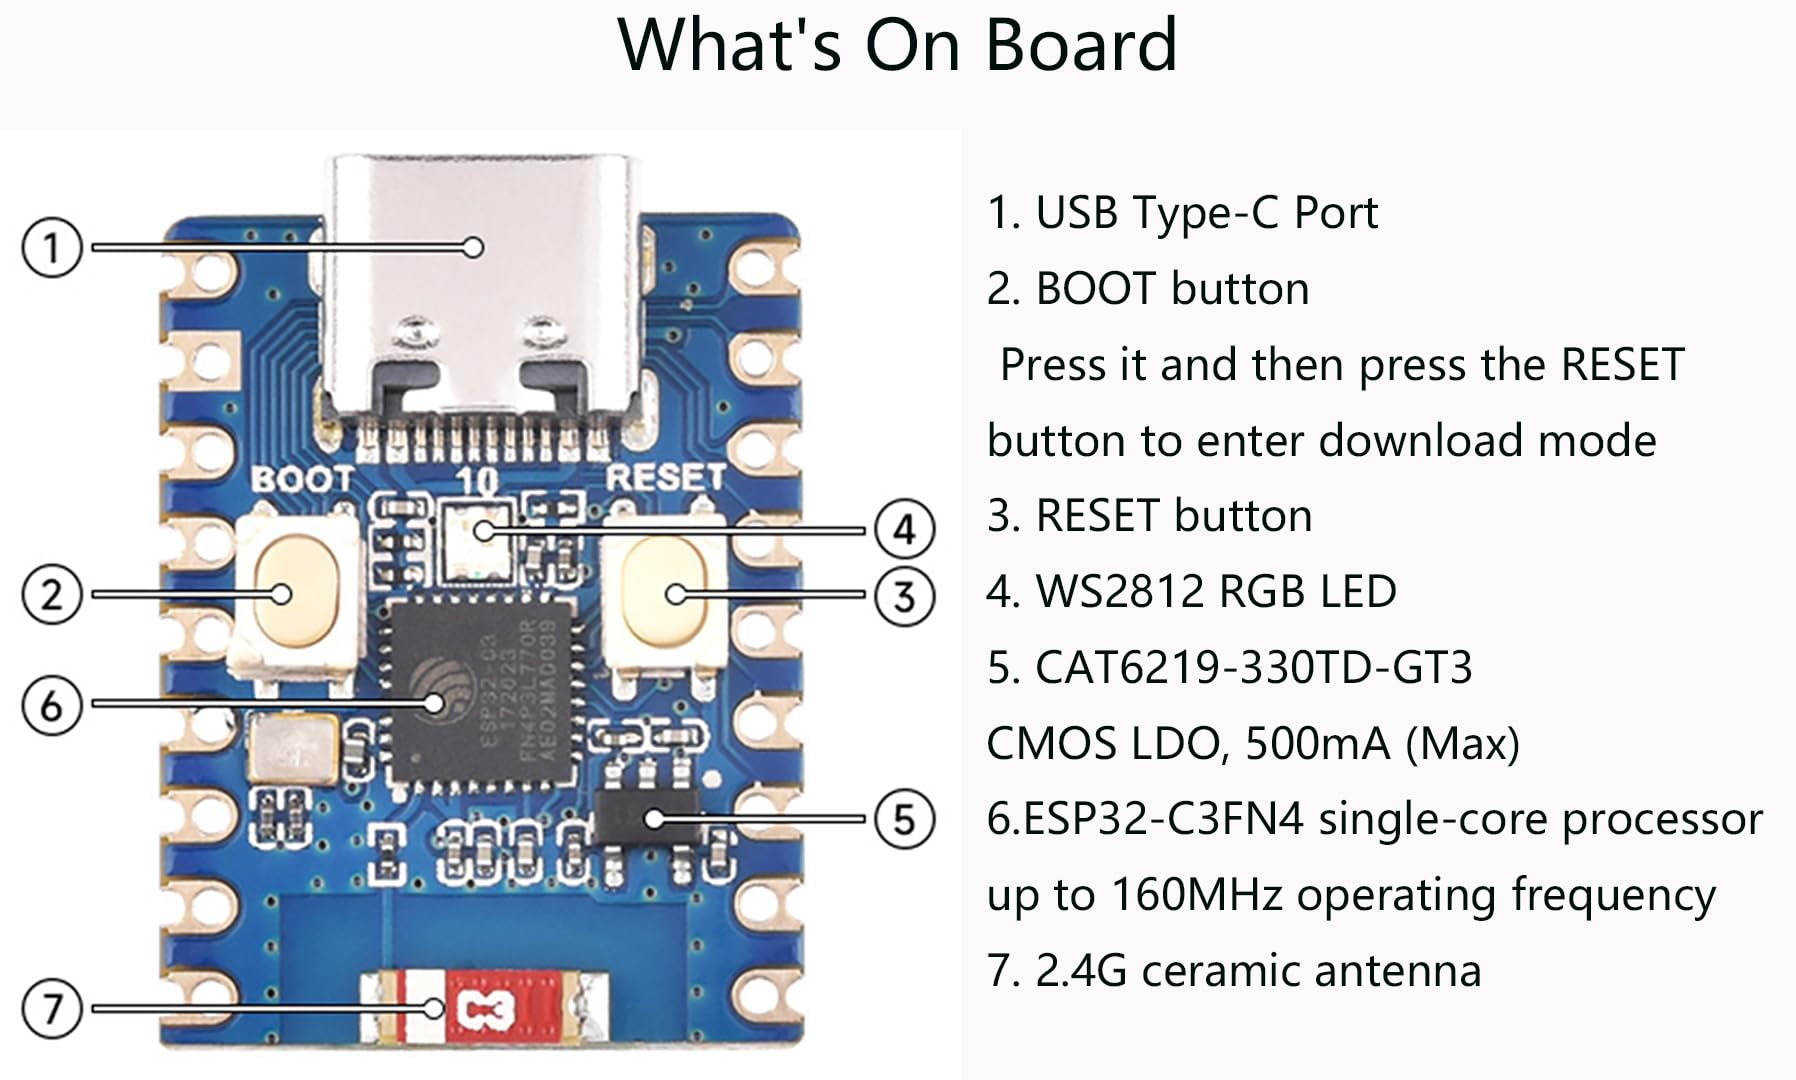 ESP32-C3 Mini Development Board, Based on ESP32-C3FN4 Single-Core Processor 160MHz Running Frequency, Support 2.4GHz Wi-Fi & Bluetooth 5, Onboard 400KB of SRAM and 384KB ROM, 4MB Flash Memory